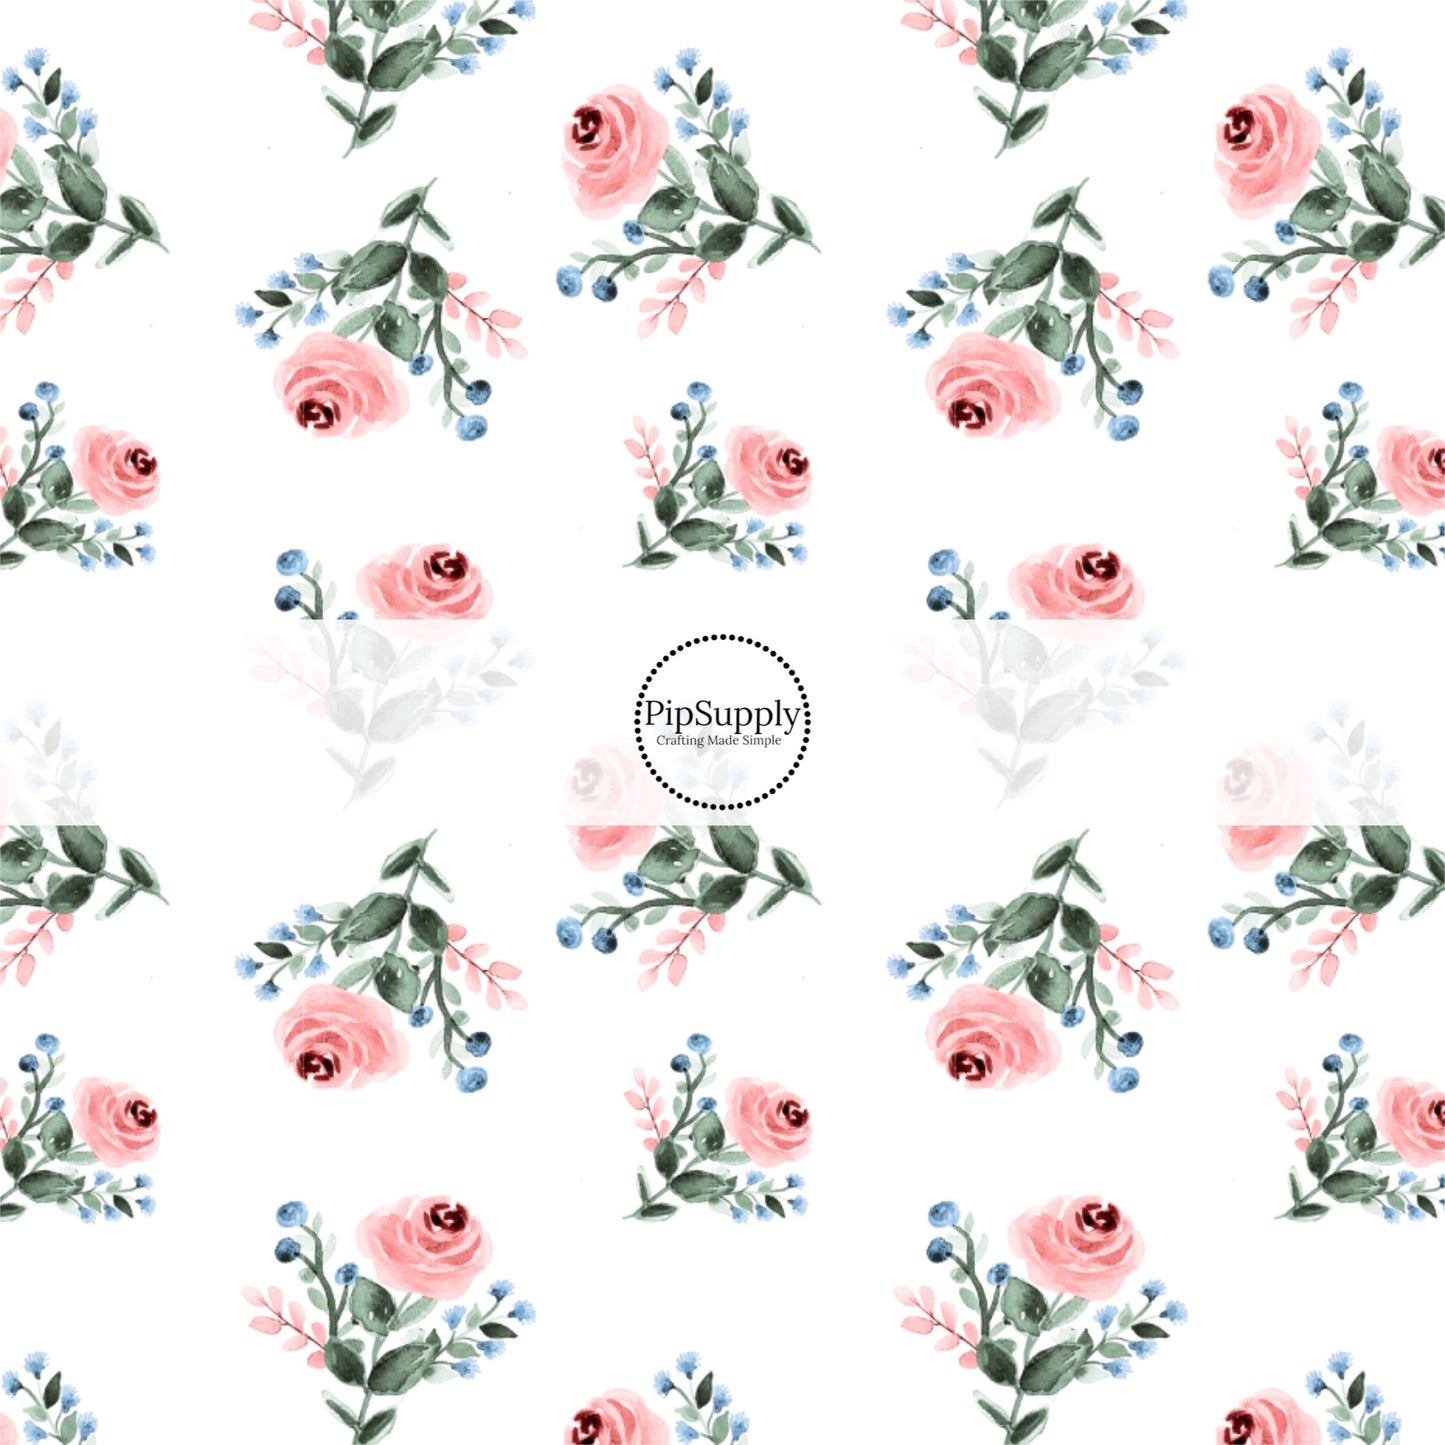 This summer fabric by the yard features pink roses on cream. This fun summer themed fabric can be used for all your sewing and crafting needs!